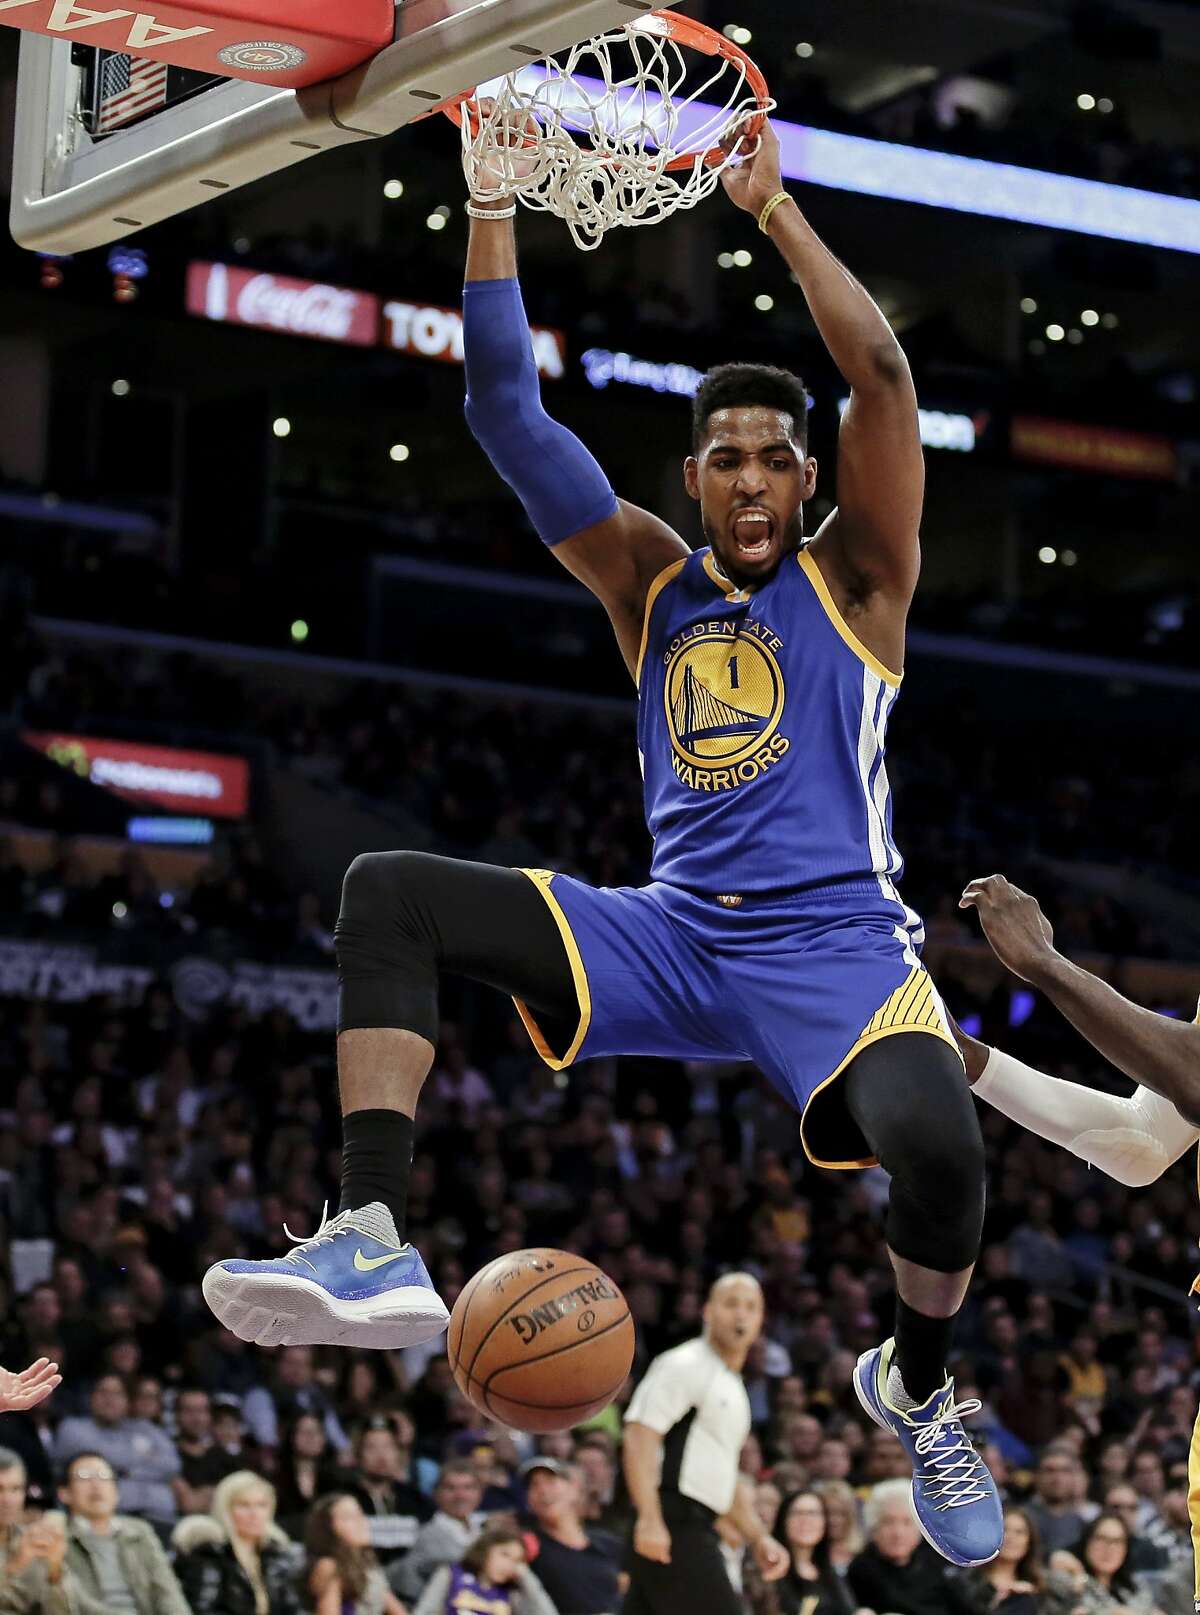 Golden State Warriors forward Jason Thompson dunks against the Los Angeles Lakers during the first half of an NBA basketball game in Los Angeles, Tuesday, Jan. 5, 2016. (AP Photo/Chris Carlson)